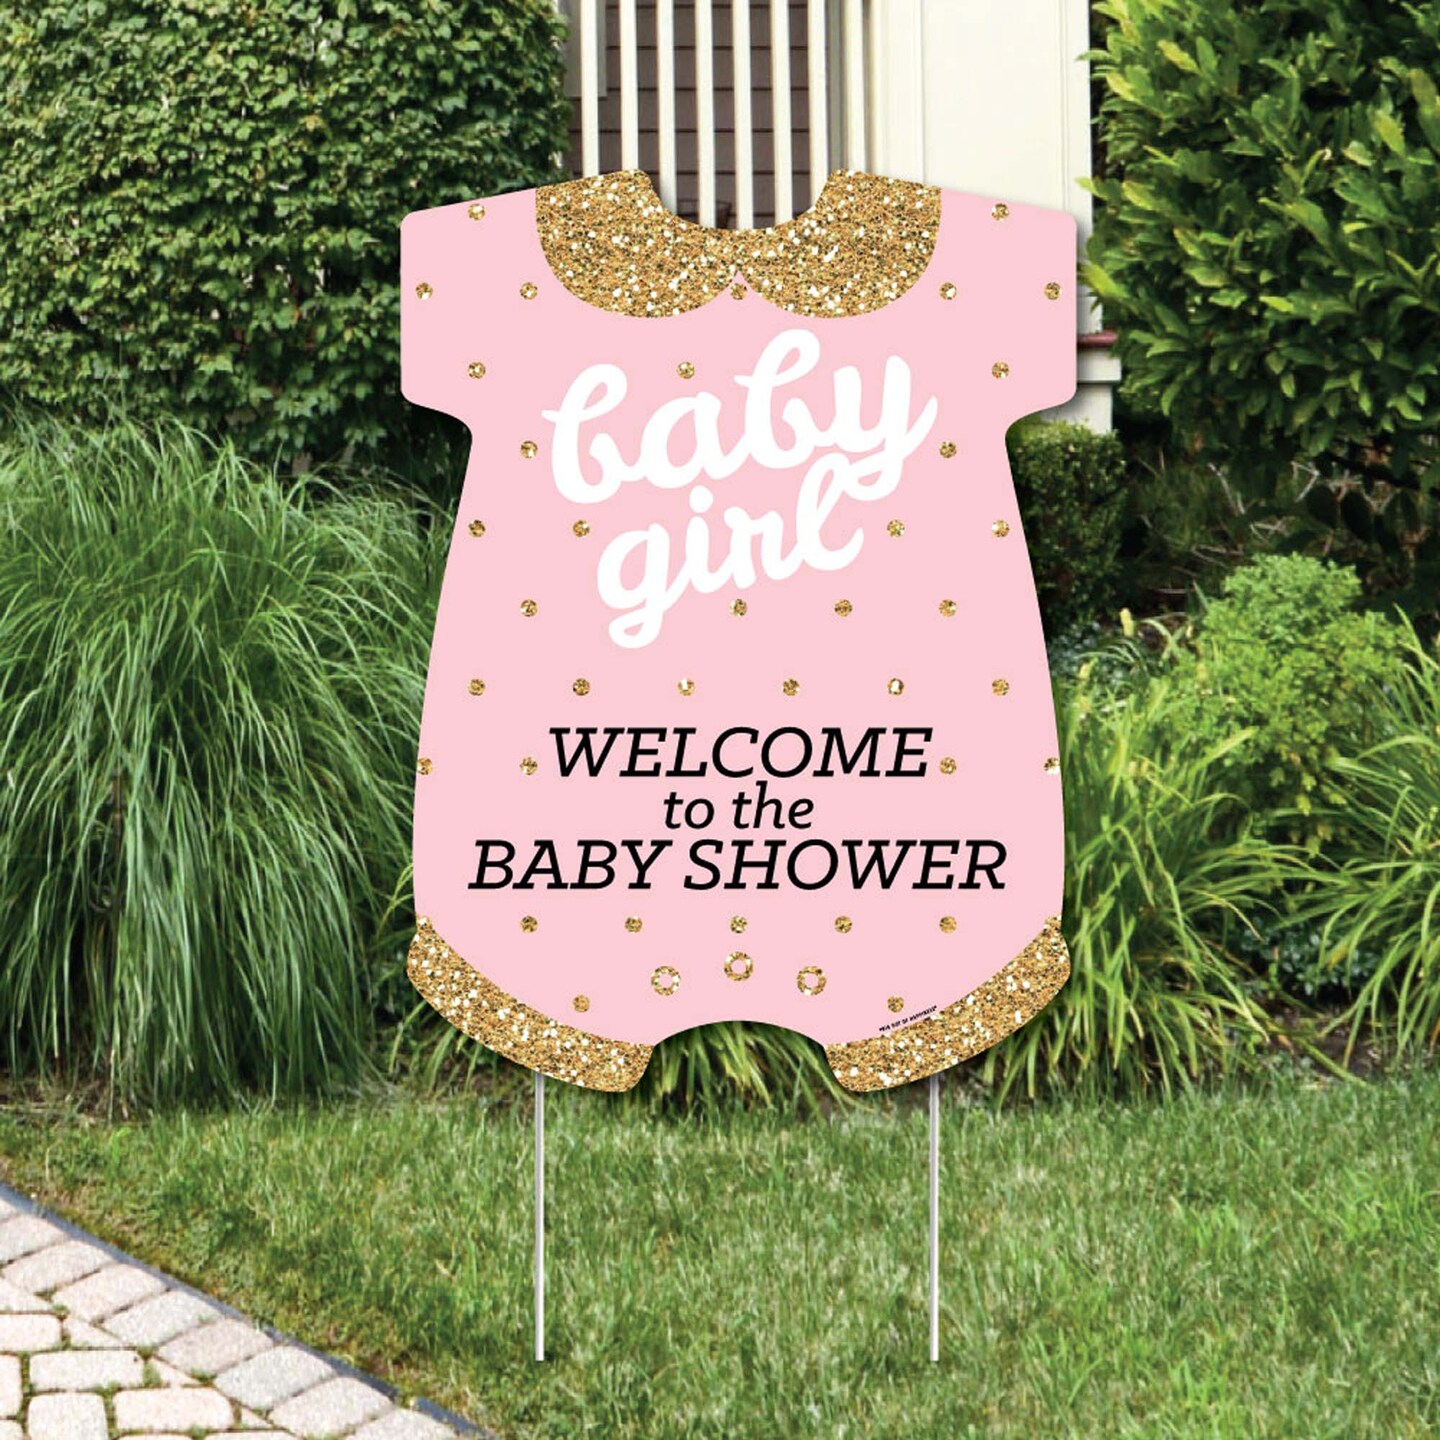 Baby Shower Welcome Entrance Set Up